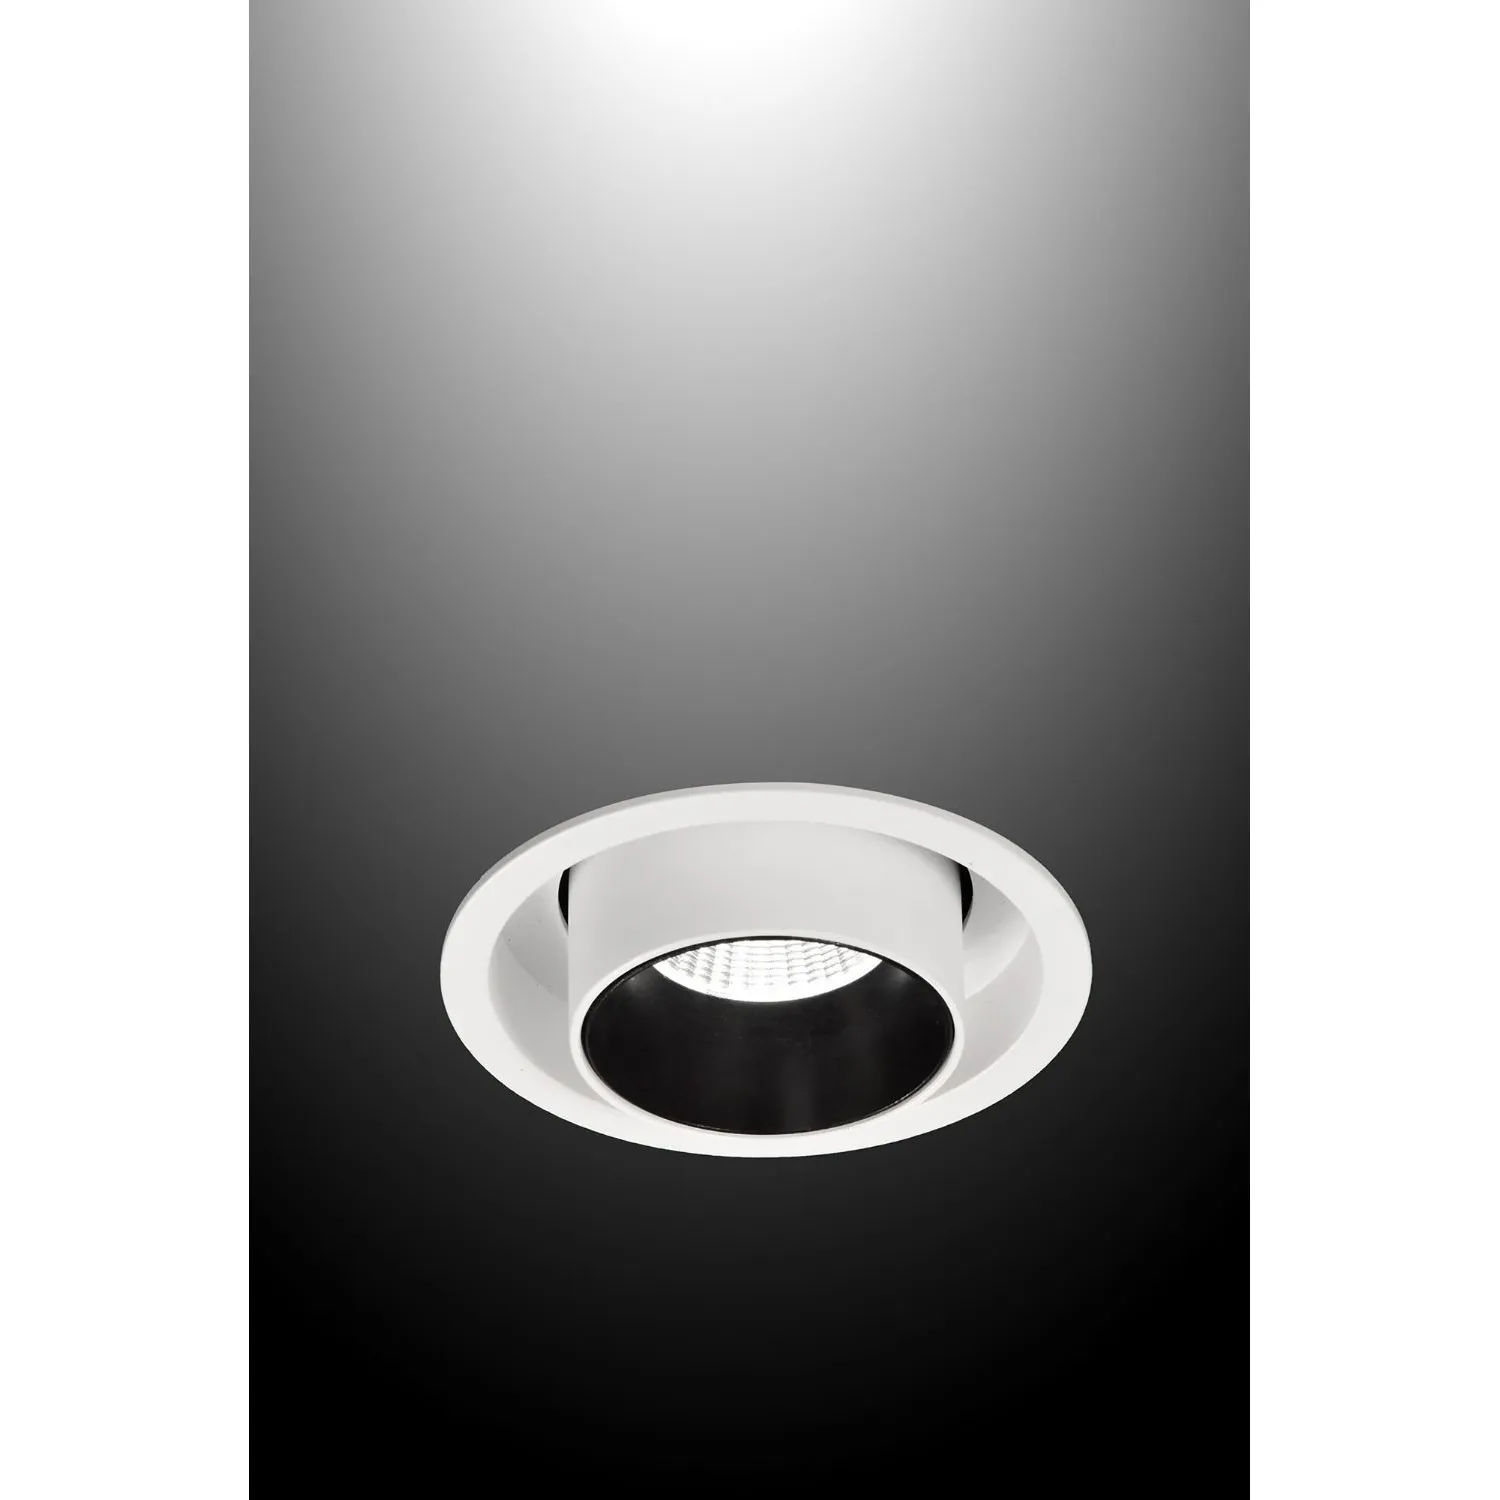 Garda Retractable Recessed Swivel Spotlight, 7W, 3000K, 610lm, Matt White And Black, Cut Out 84mm, Driver Included, Driver Included, 3yrs Warranty